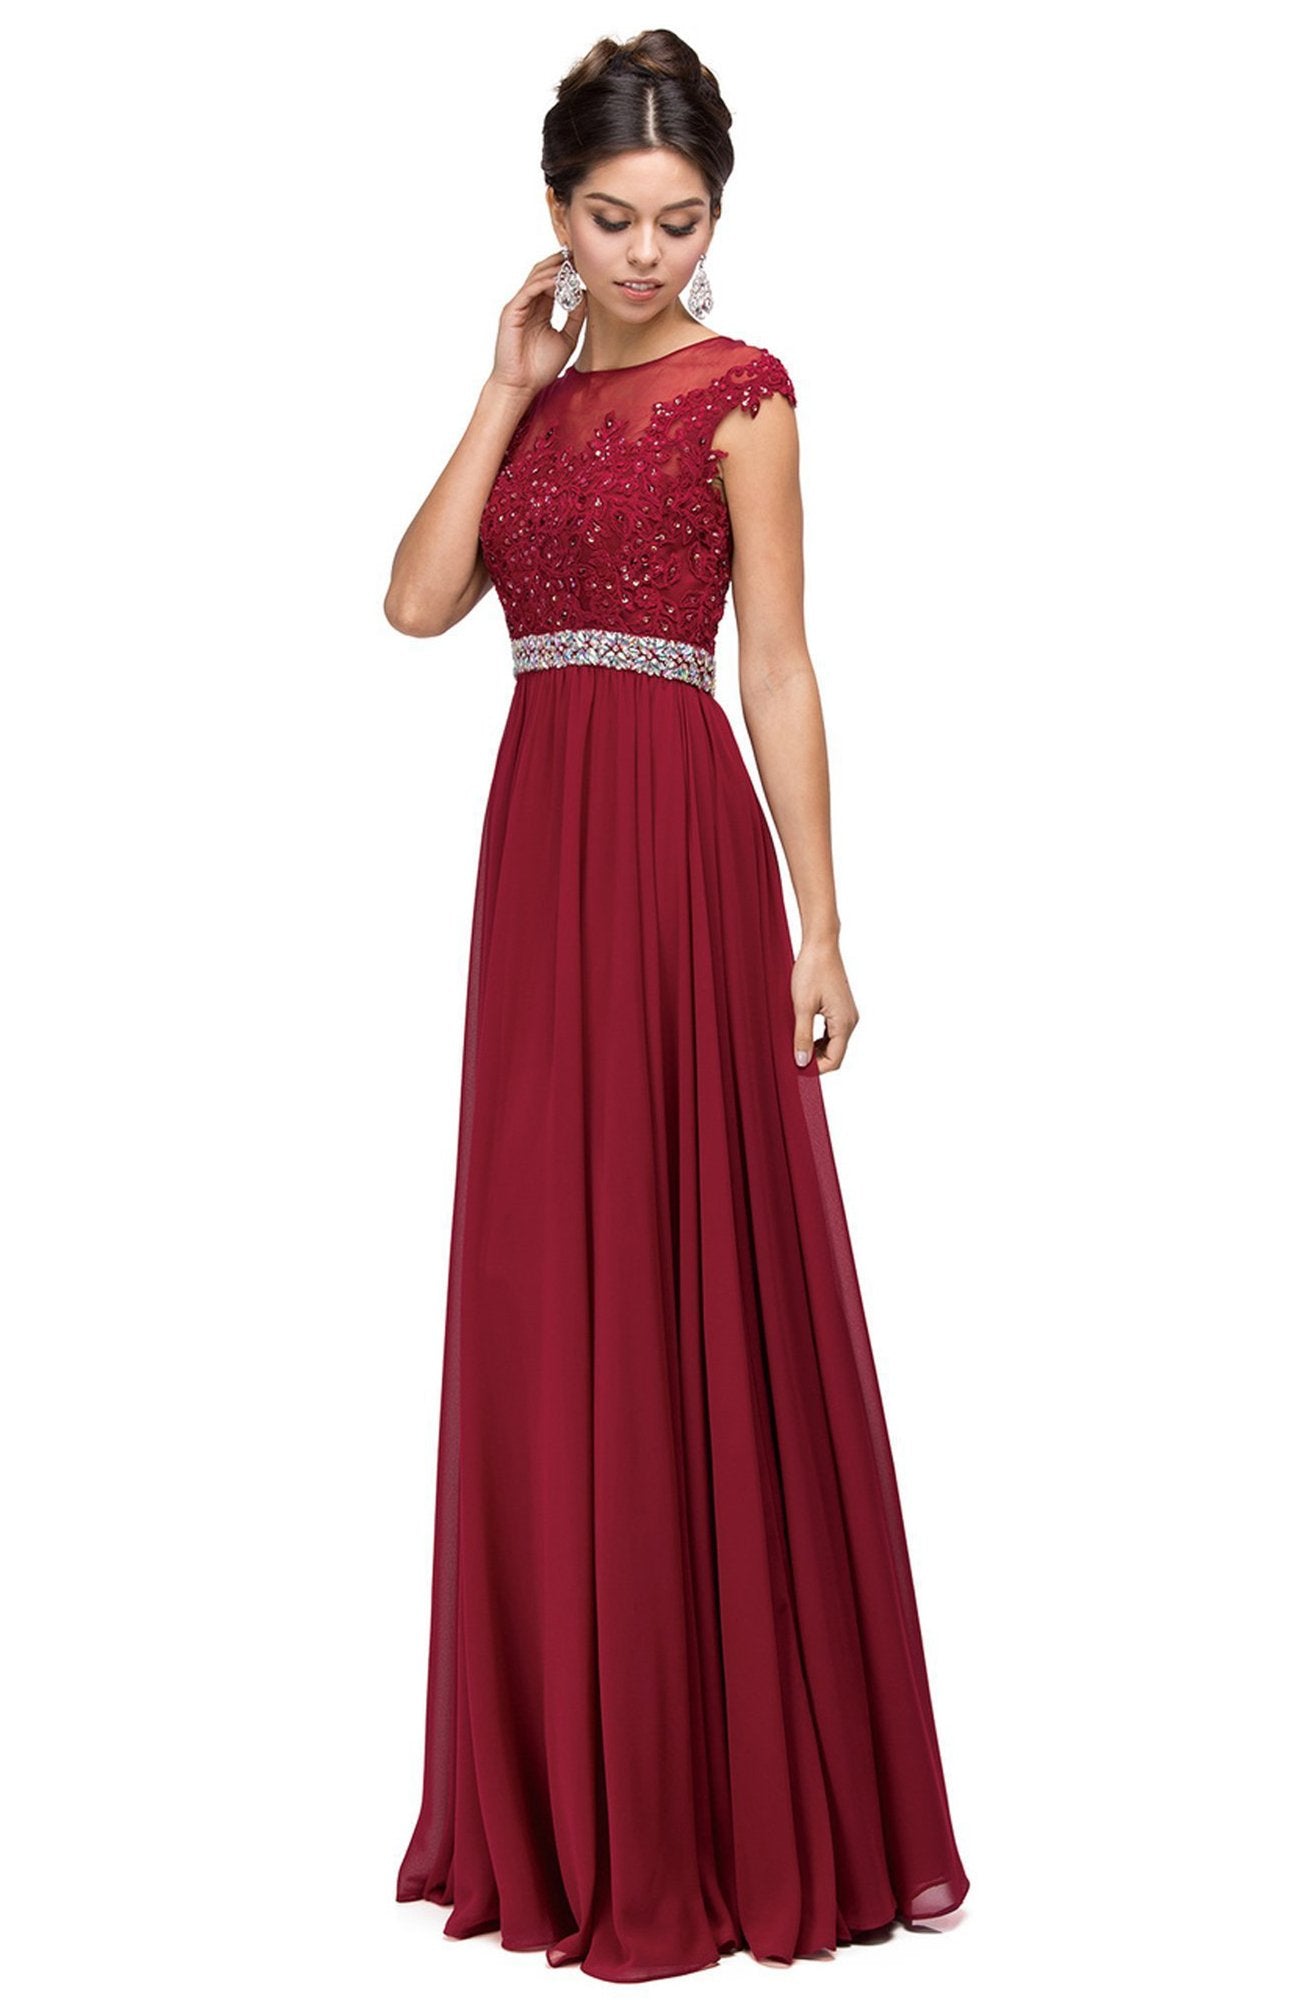 Dancing Queen - Cap Sleeve Illusion Beaded Belt A-Line Dress 9400 In Red